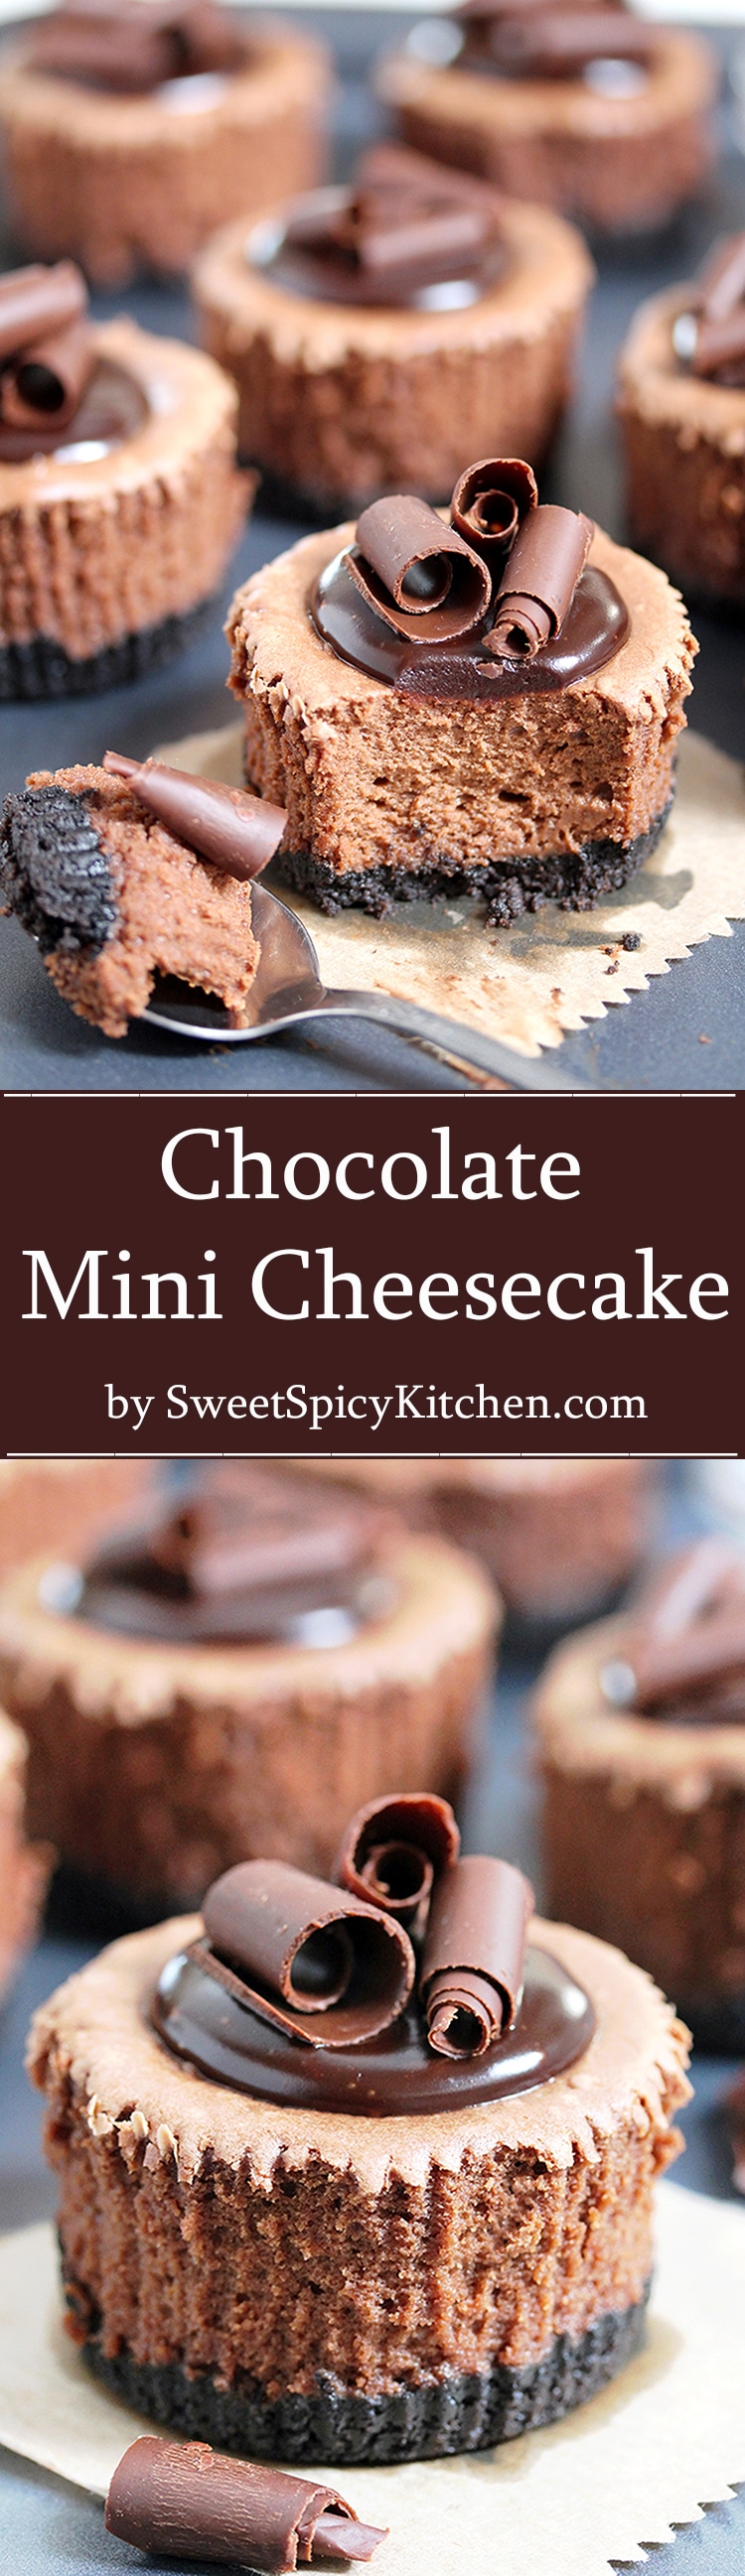 Chocolate Mini Cheesecake with Oreo Crust  – this creamy, rich cheesecake with full chocolate taste and Oreo layer, topped with chocolate ganache and formed as mini cheesecakes, will be loved by all the chocolate fans.